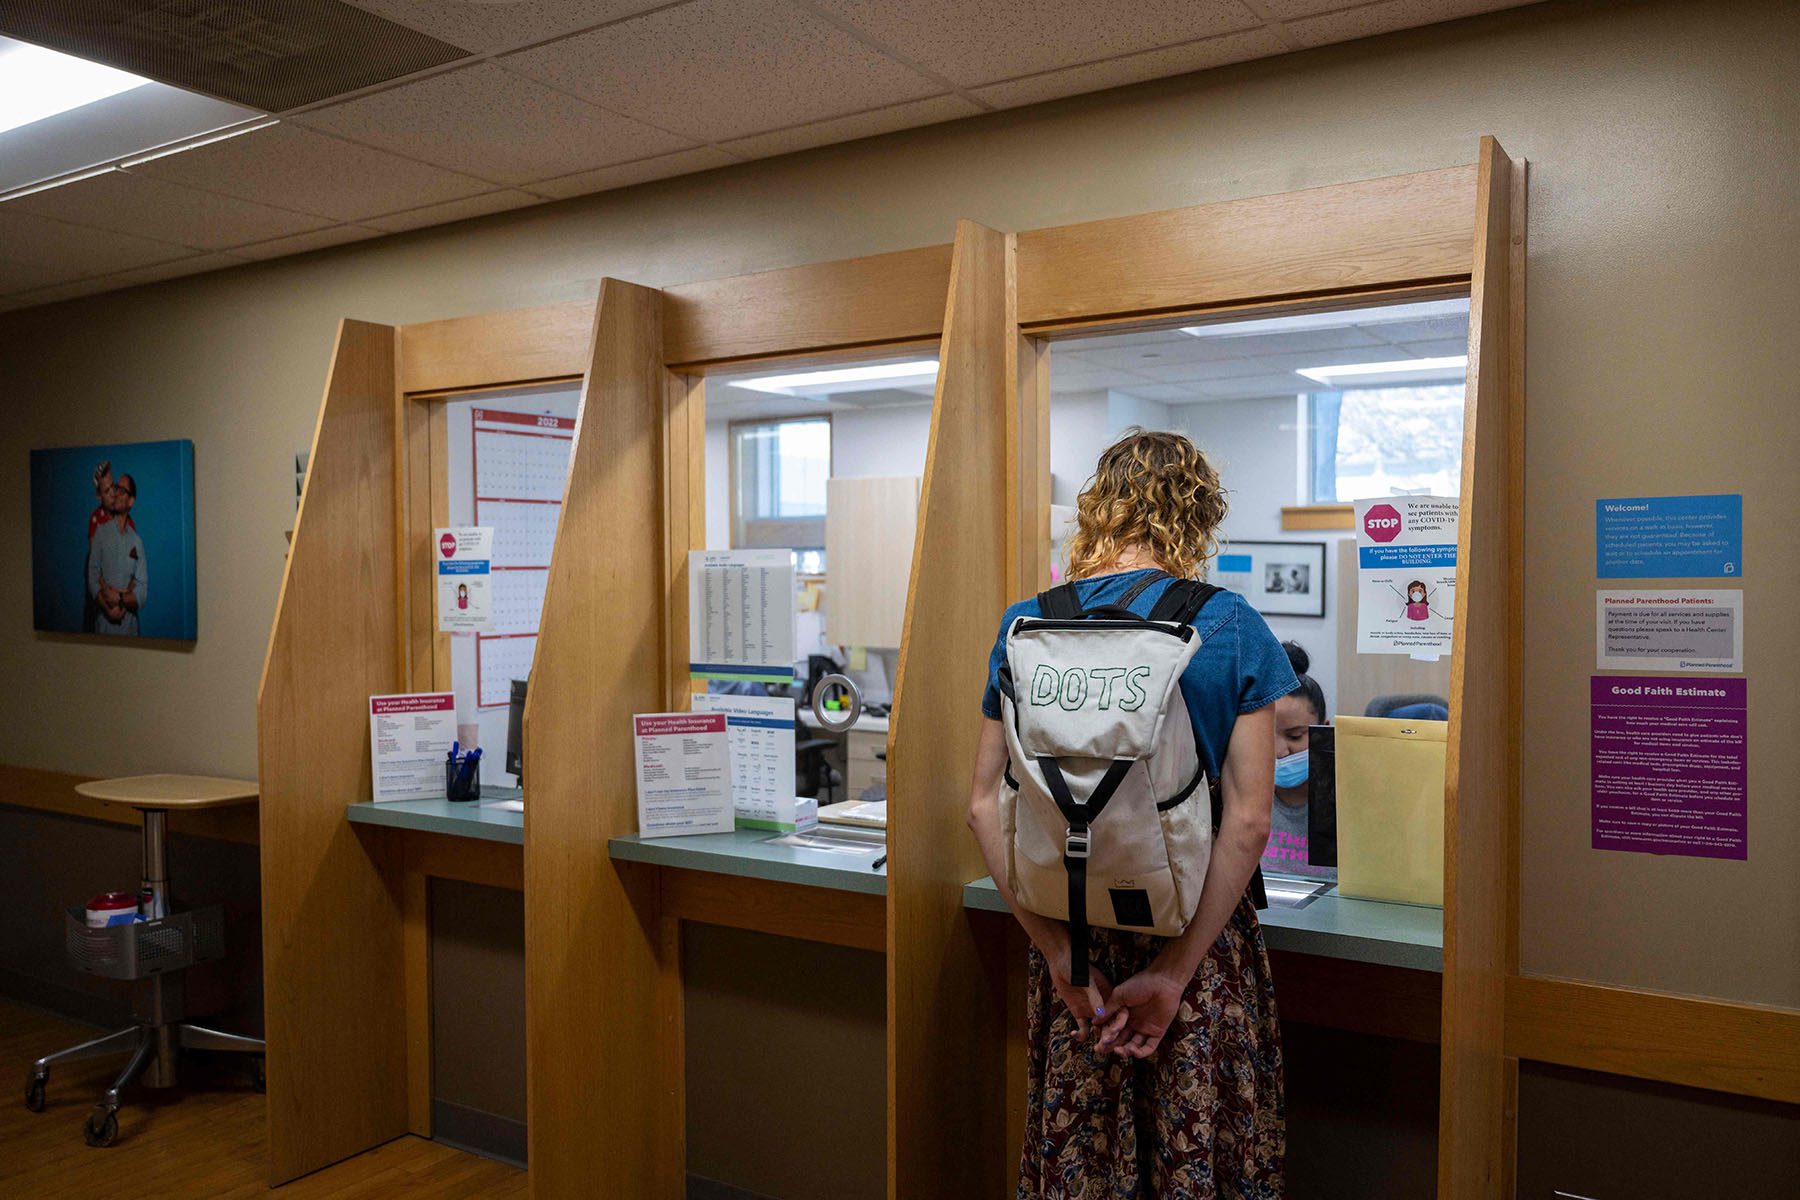 A patient checks in at a Planned Parenthood Health Center.